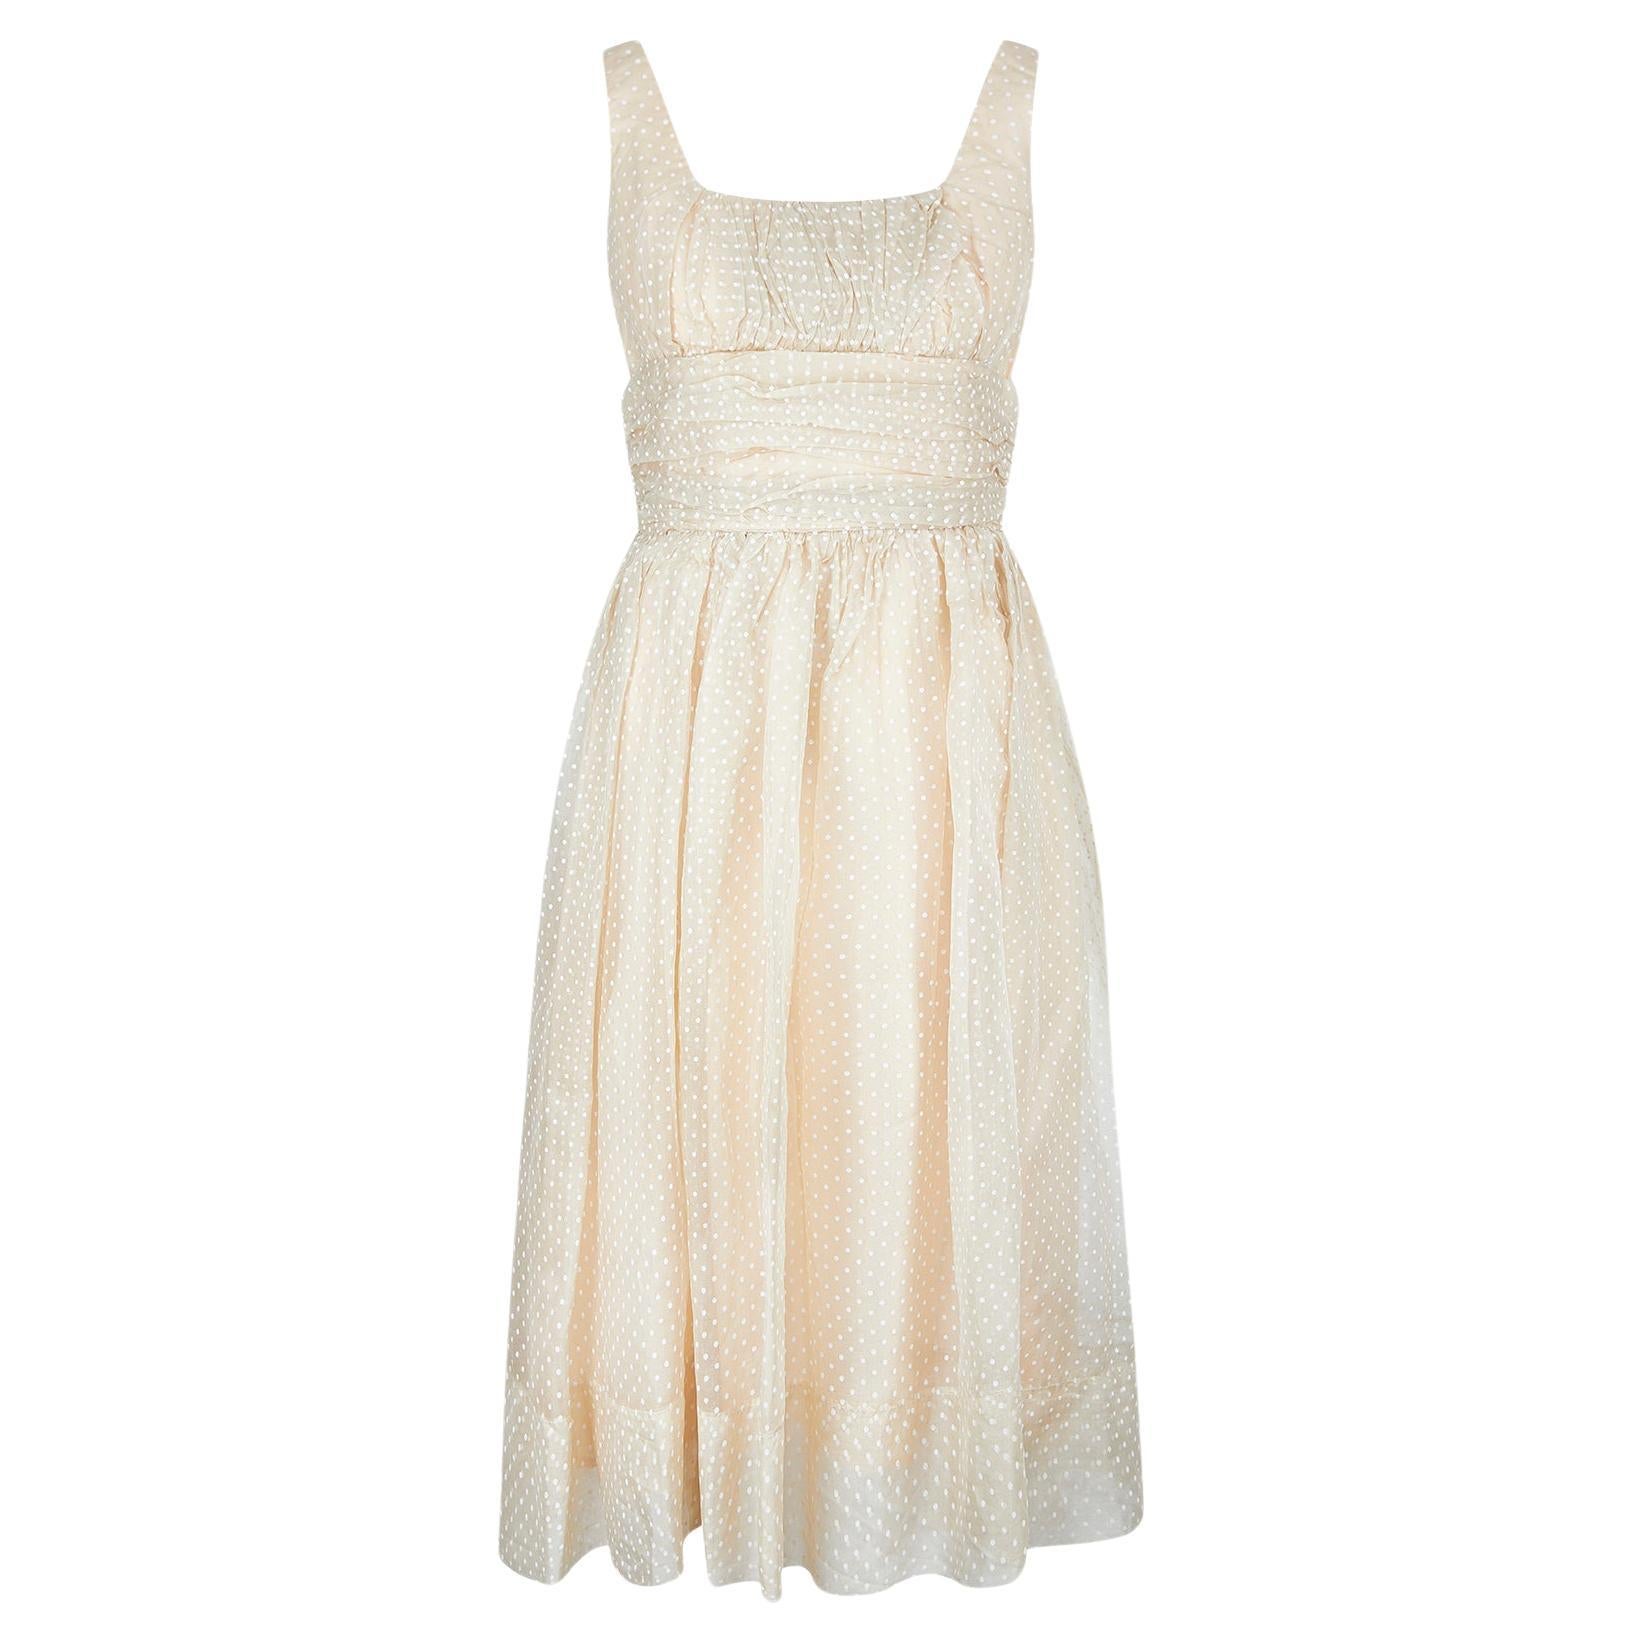 1960s Blanes Beige and White Polka Dot Chiffon Dress For Sale